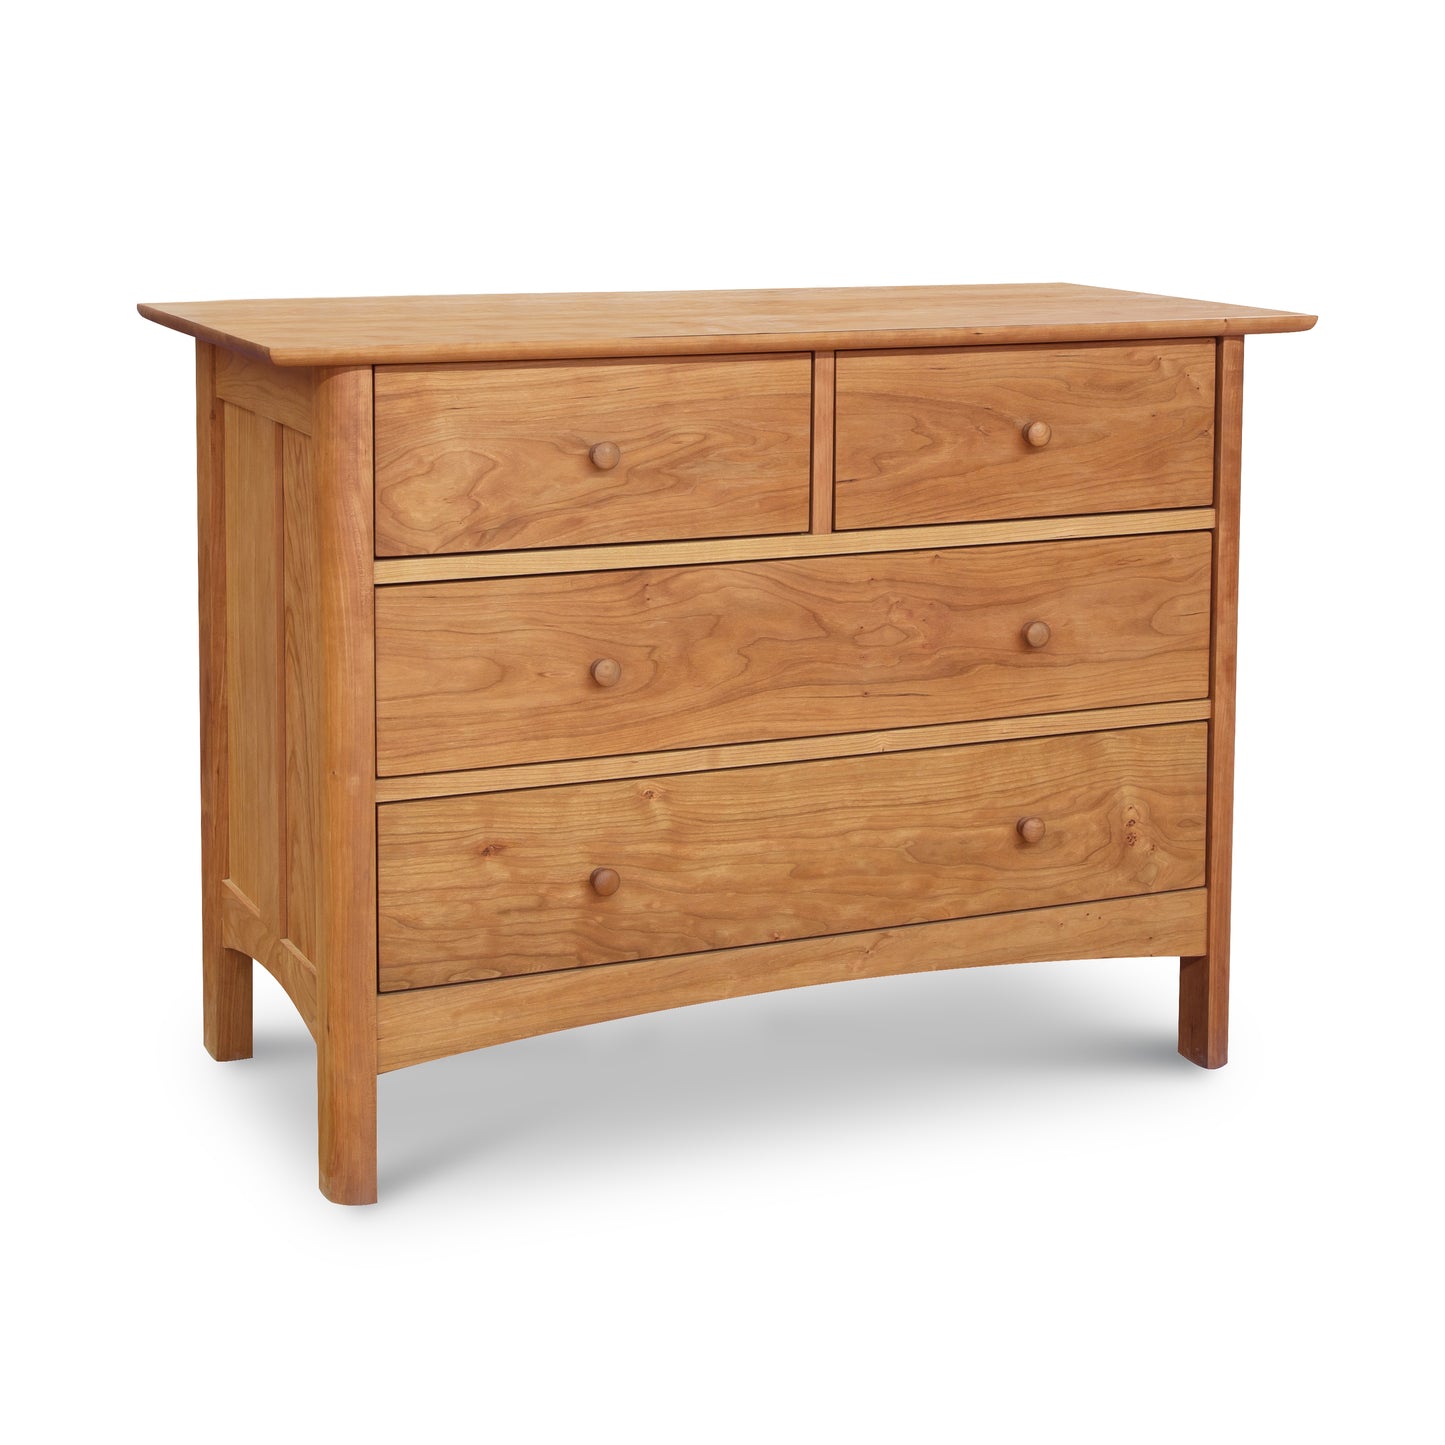 Solid wood Vermont Furniture Designs Heartwood Shaker 4-Drawer Dresser, isolated on a white background.